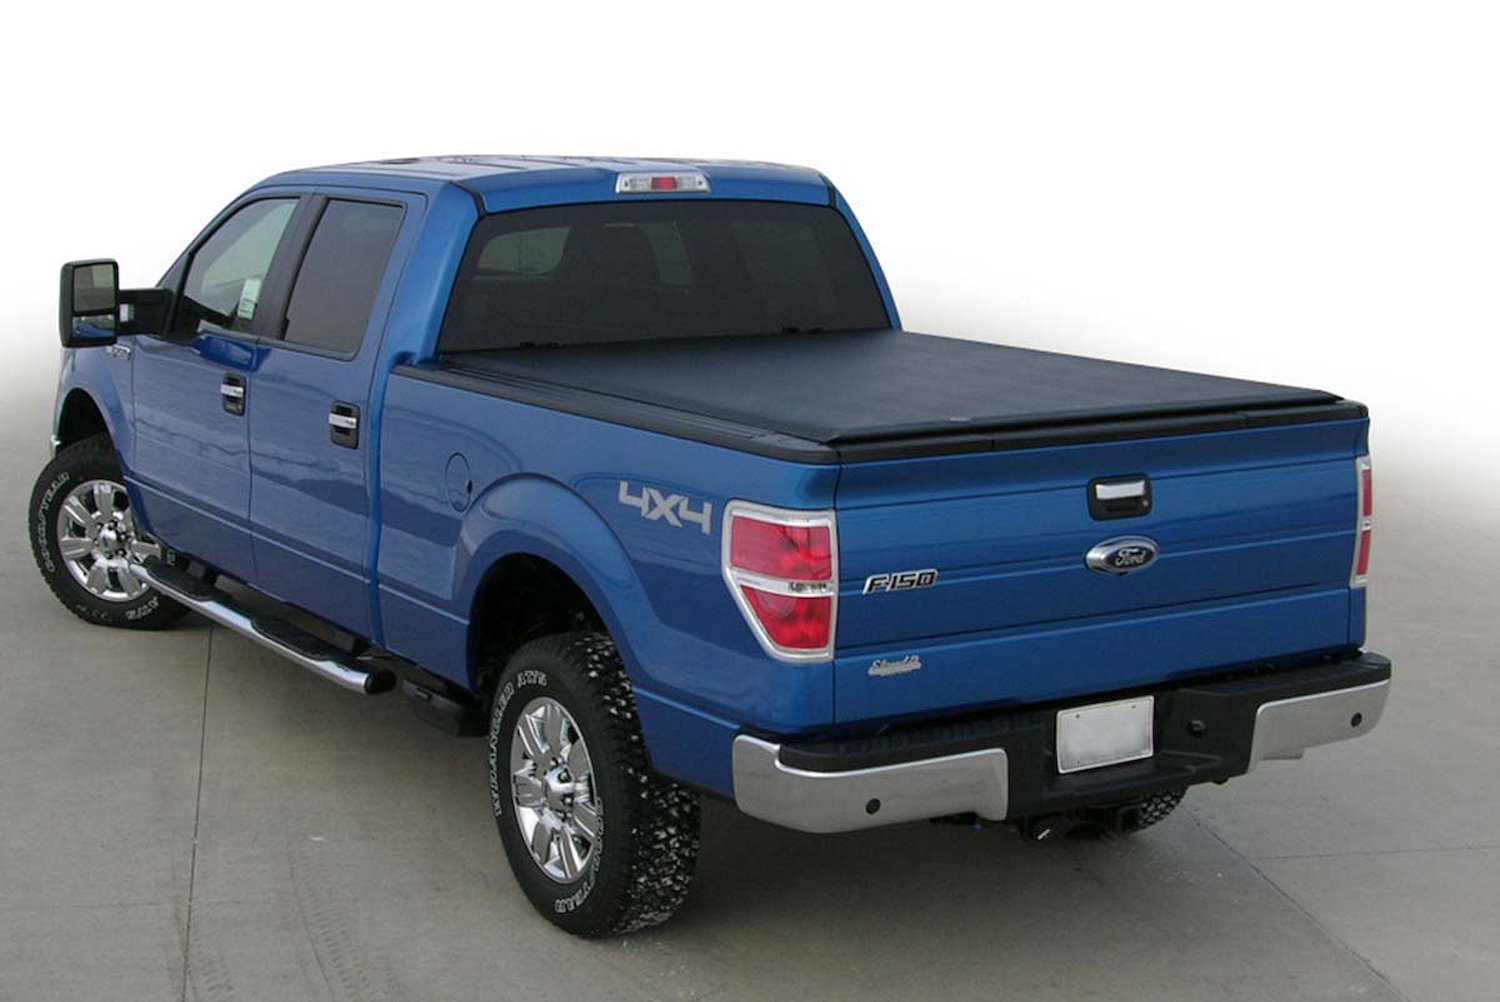 LORADO Roll-Up Tonneau Cover, Fits Select Toyota Tundra, with 8 ft. 1 in. Bed